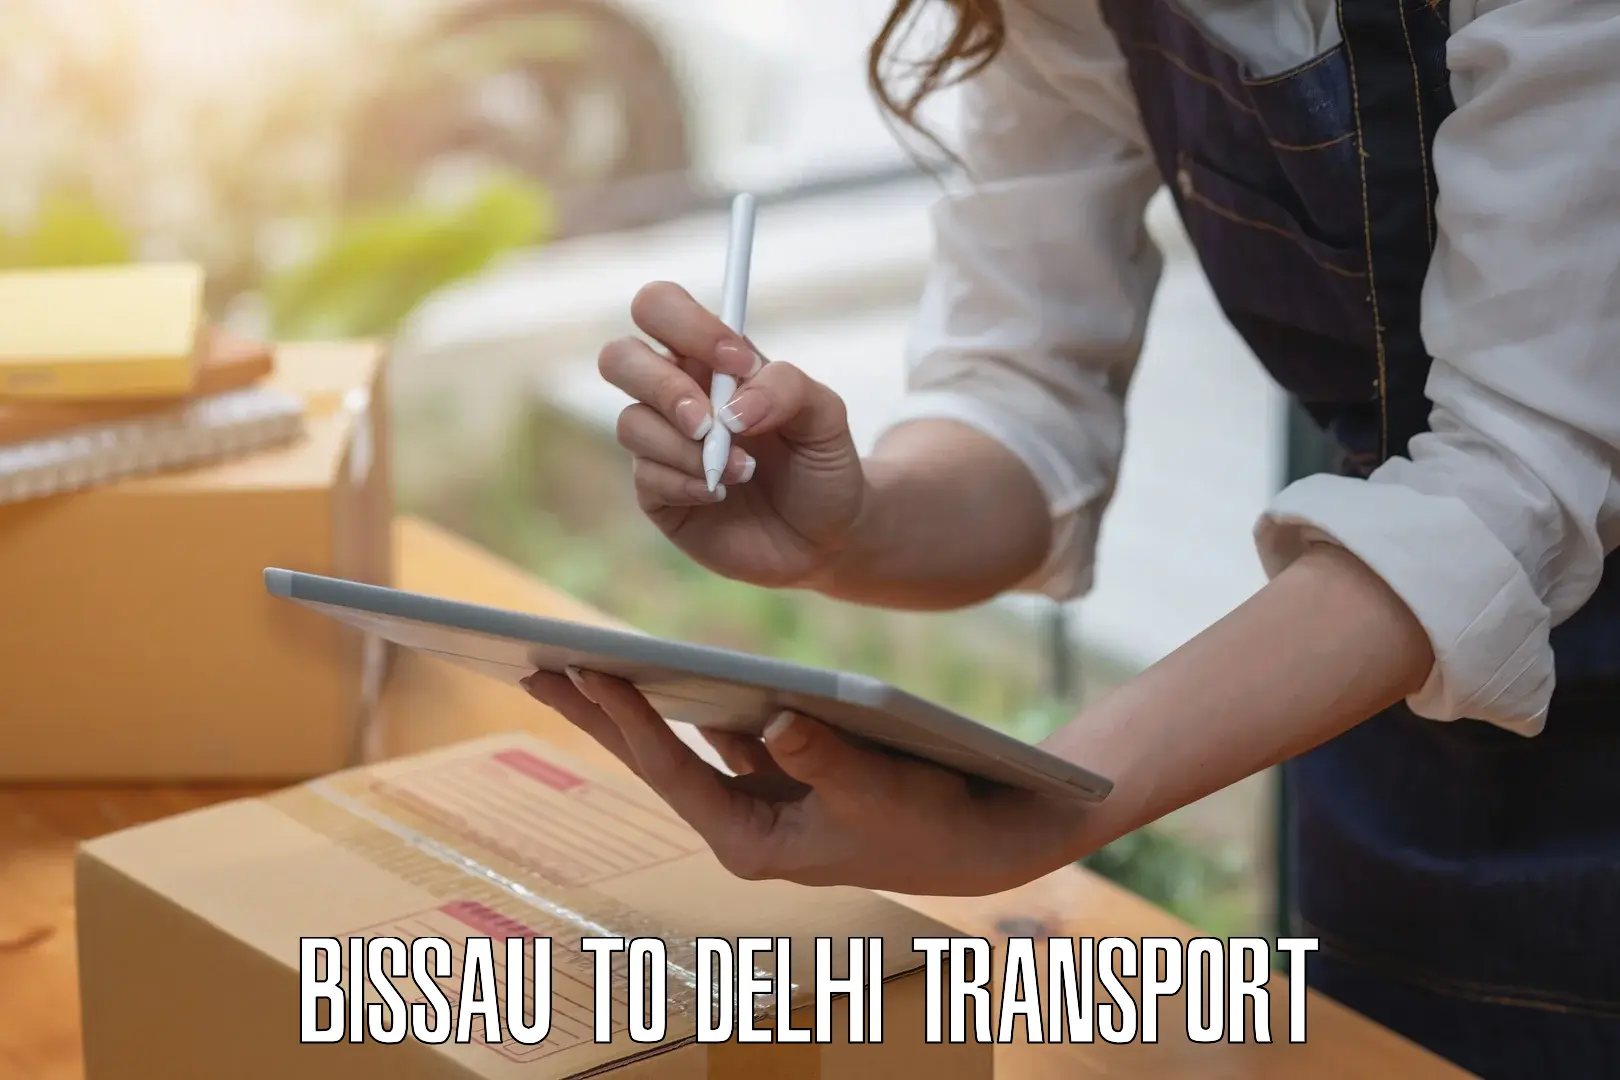 Truck transport companies in India Bissau to Lodhi Road